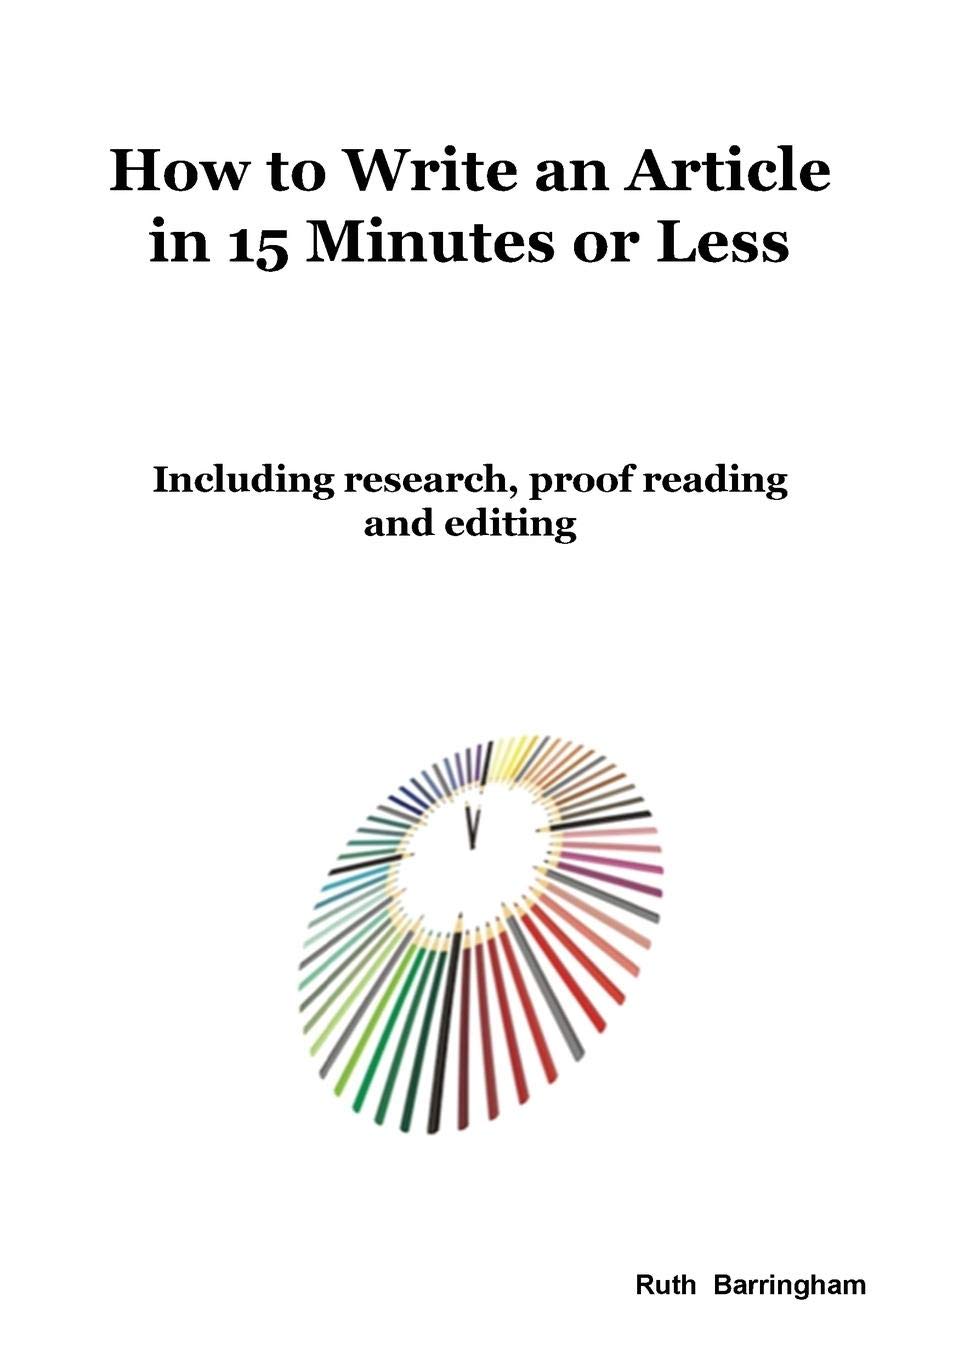 list of how to write an article in 15 minutes or less including research and proofreading ideas